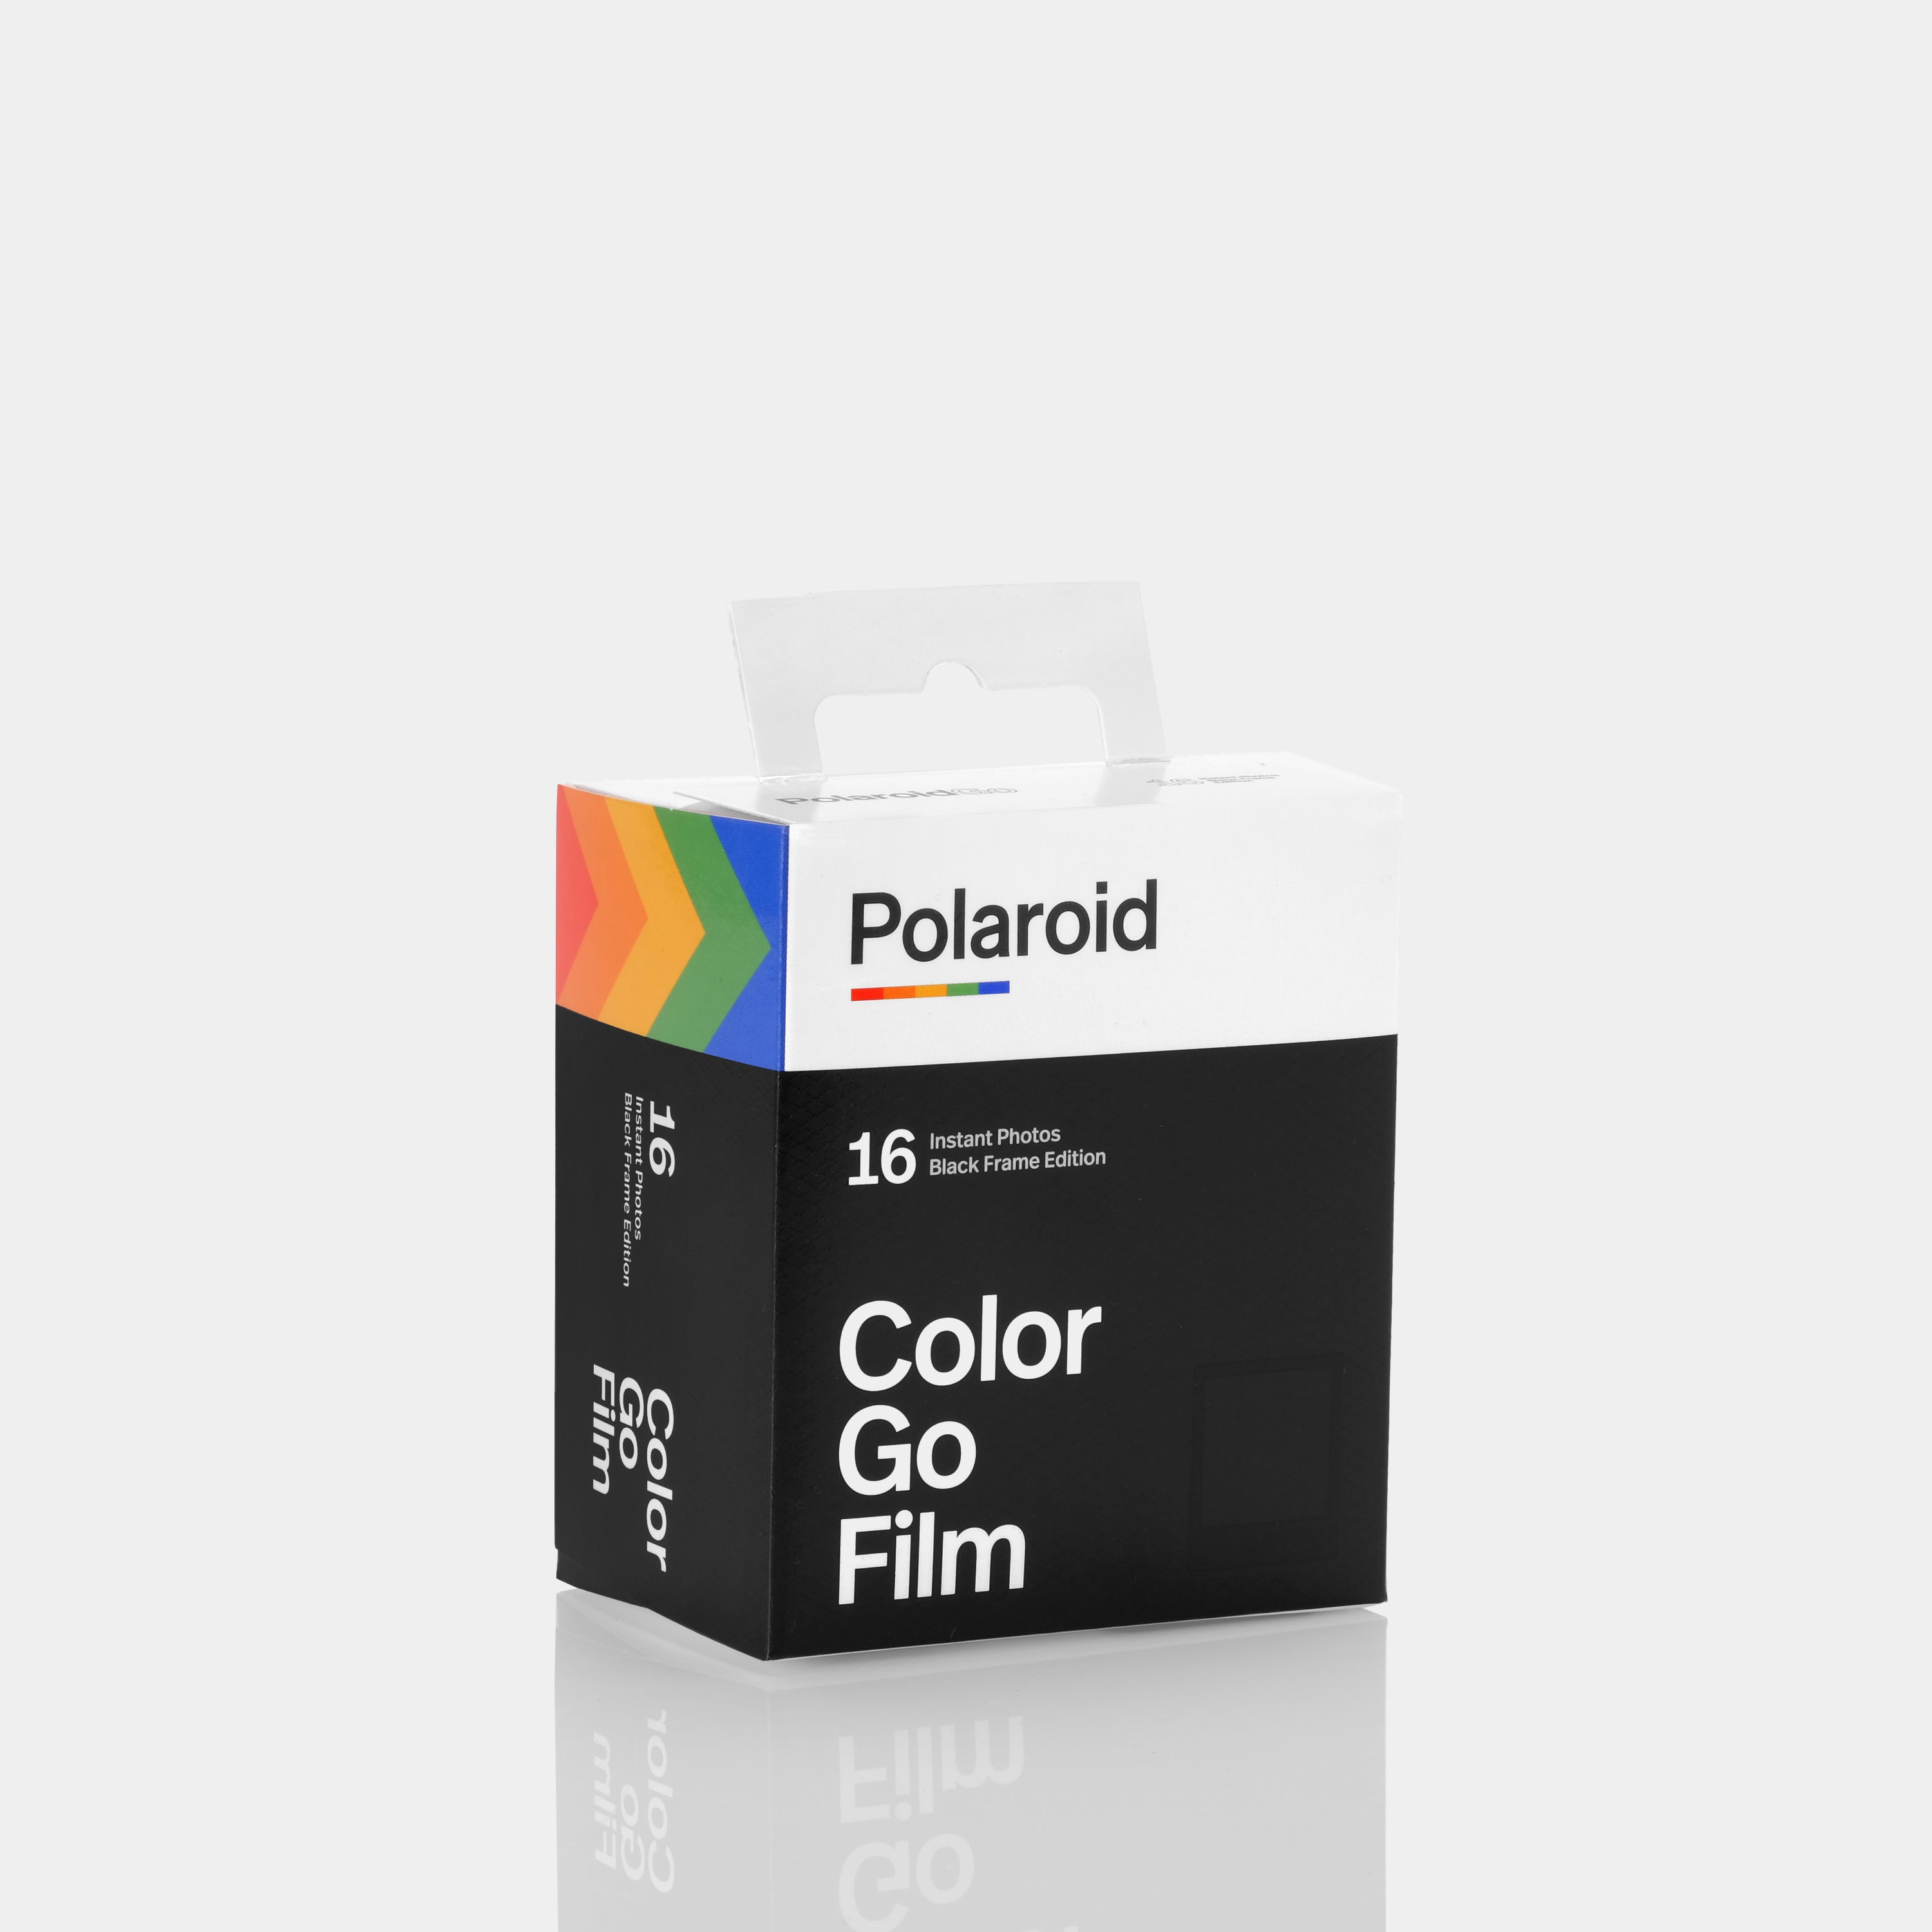 POLAROID - GO COLOR - TWIN PACK